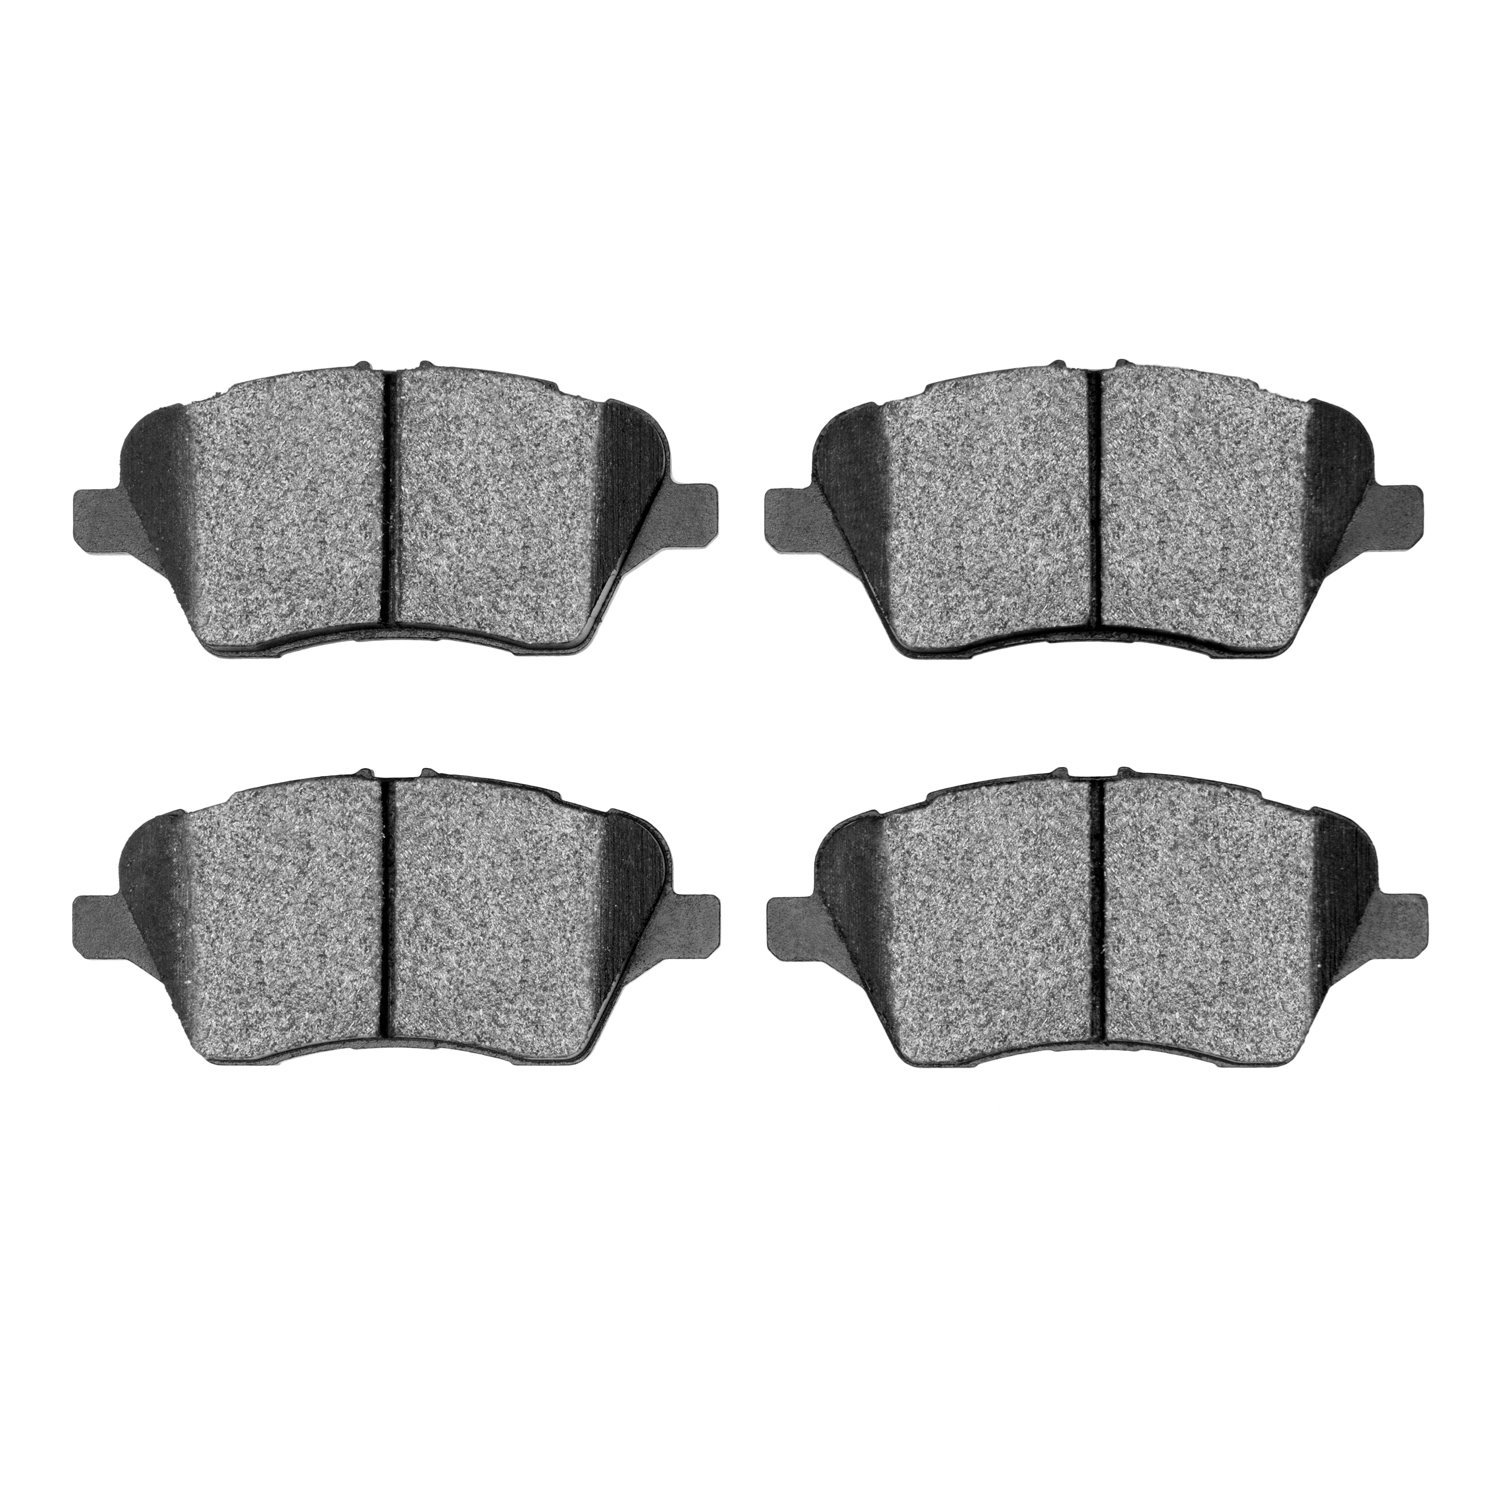 1000-1730-00 Track/Street Low-Metallic Brake Pads Kit, 2014-2019 Ford/Lincoln/Mercury/Mazda, Position: Front